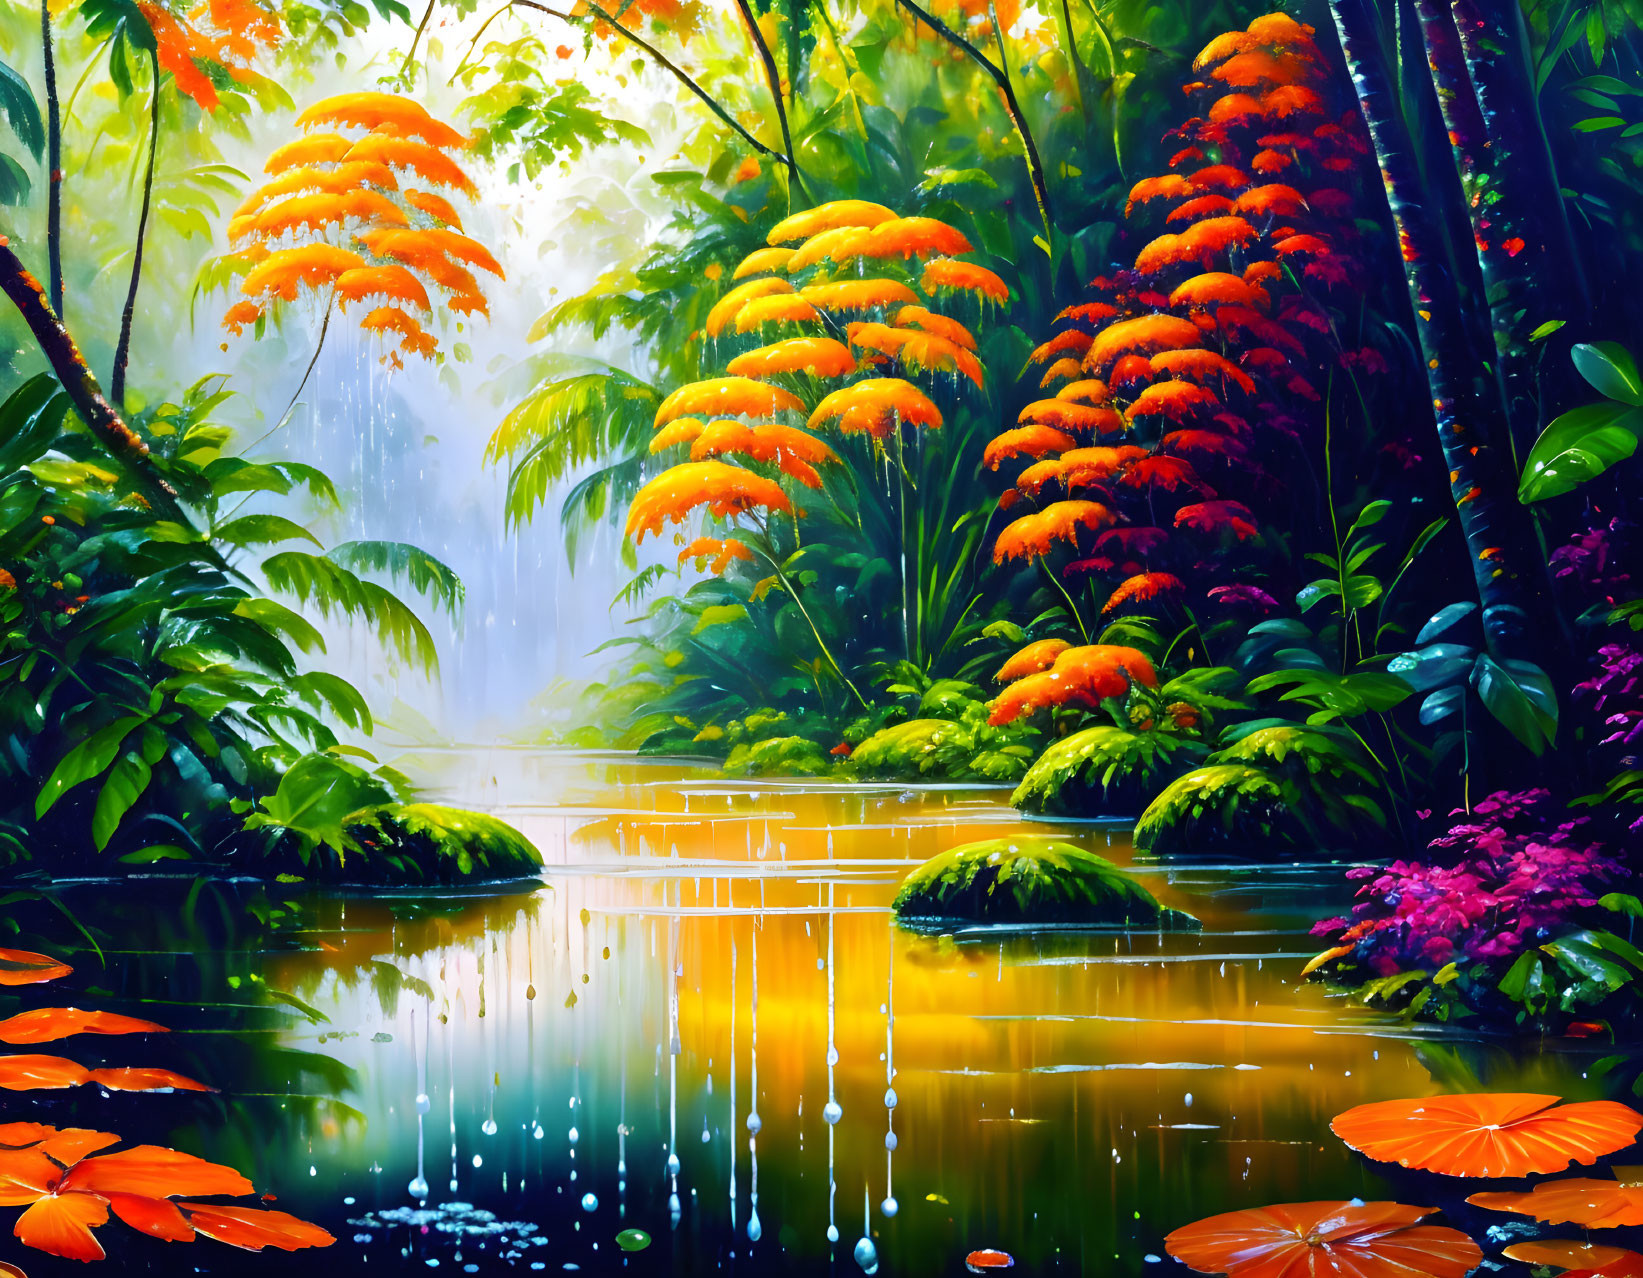 The Lush Aftermath: A Rainforest Painting